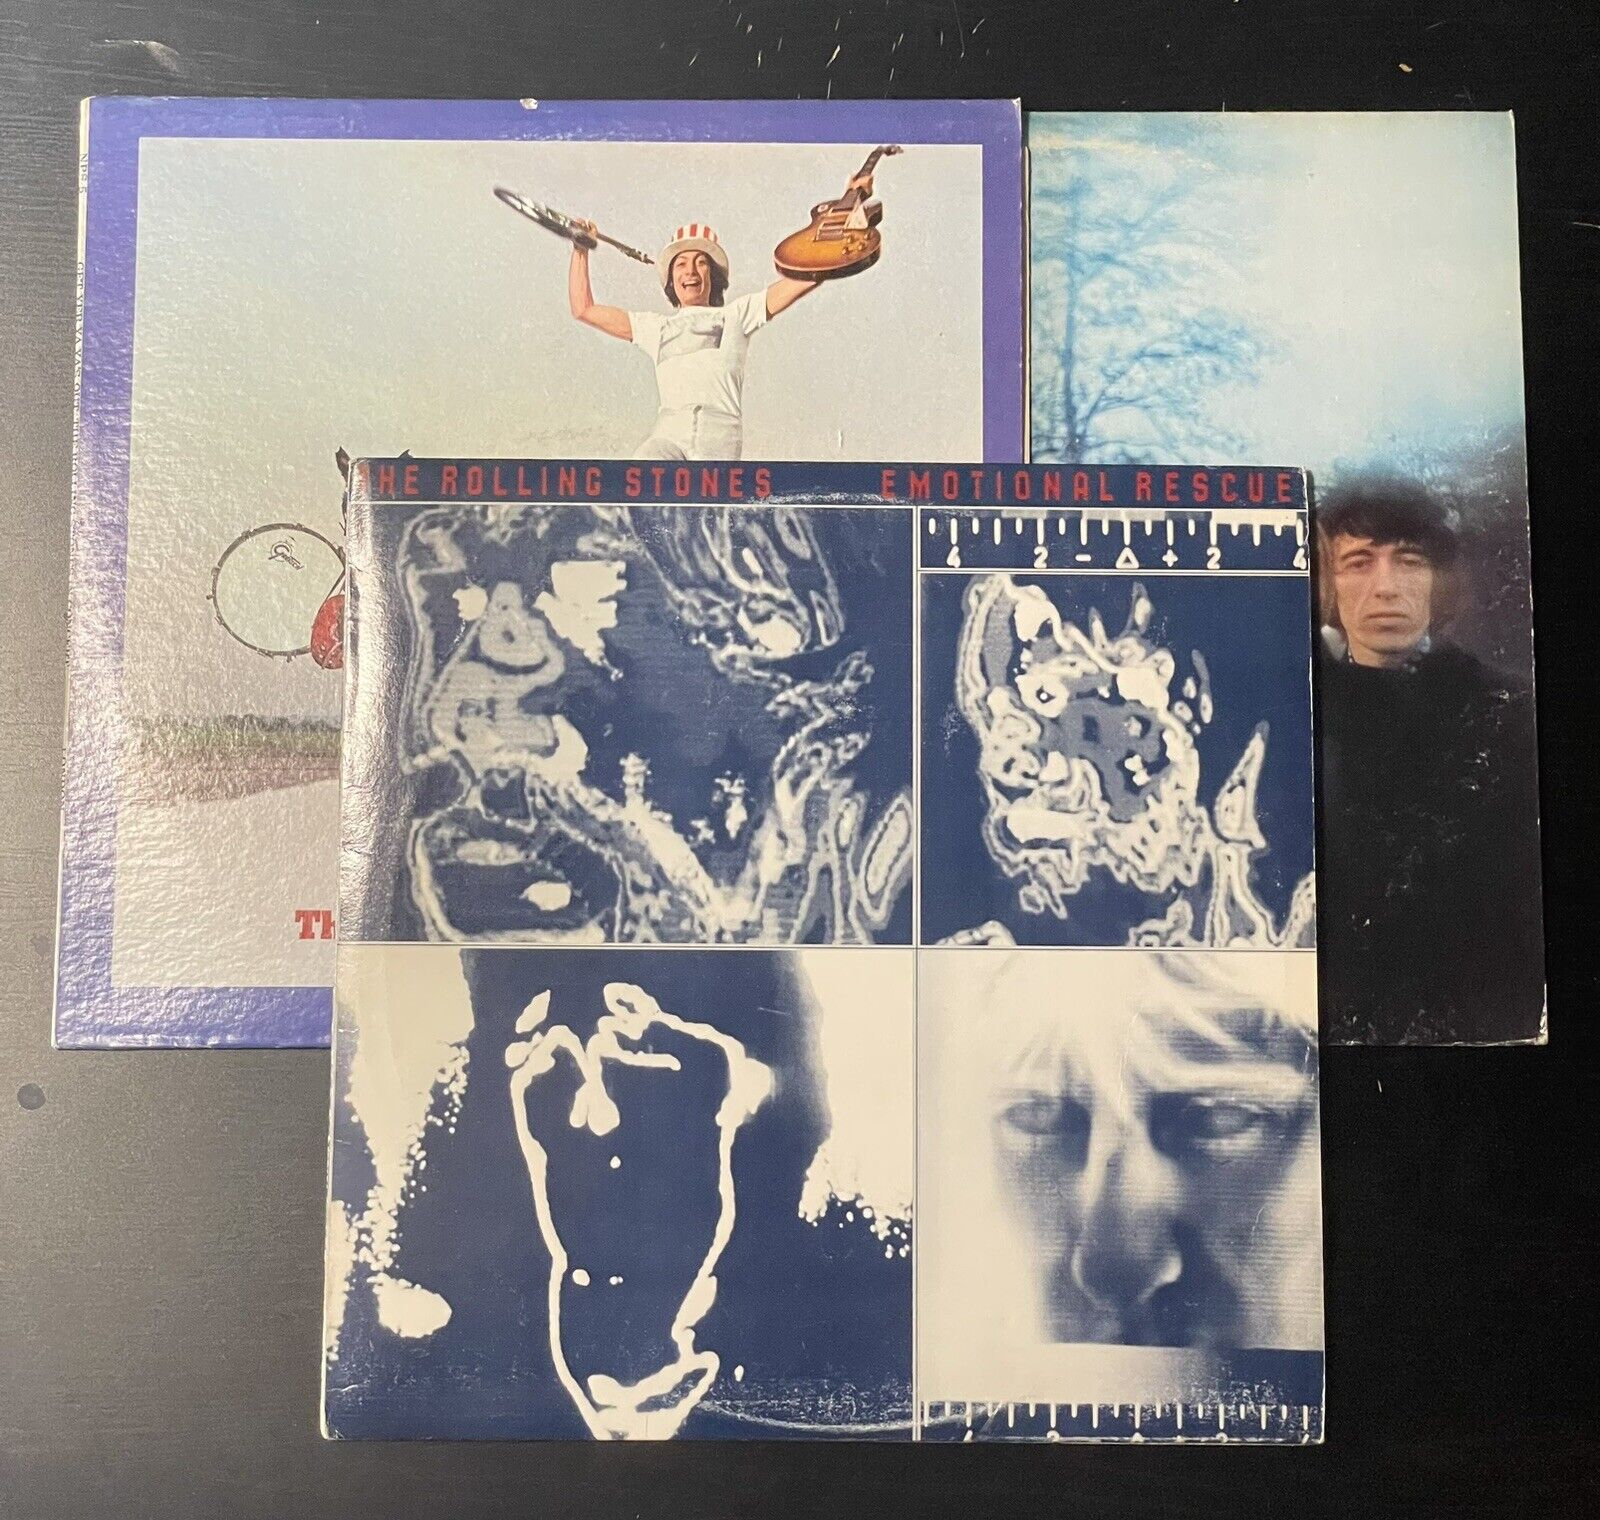 Rolling Stones 3 LP Record Lot - Between The Buttons Ya Ya’s Emotional Rescue